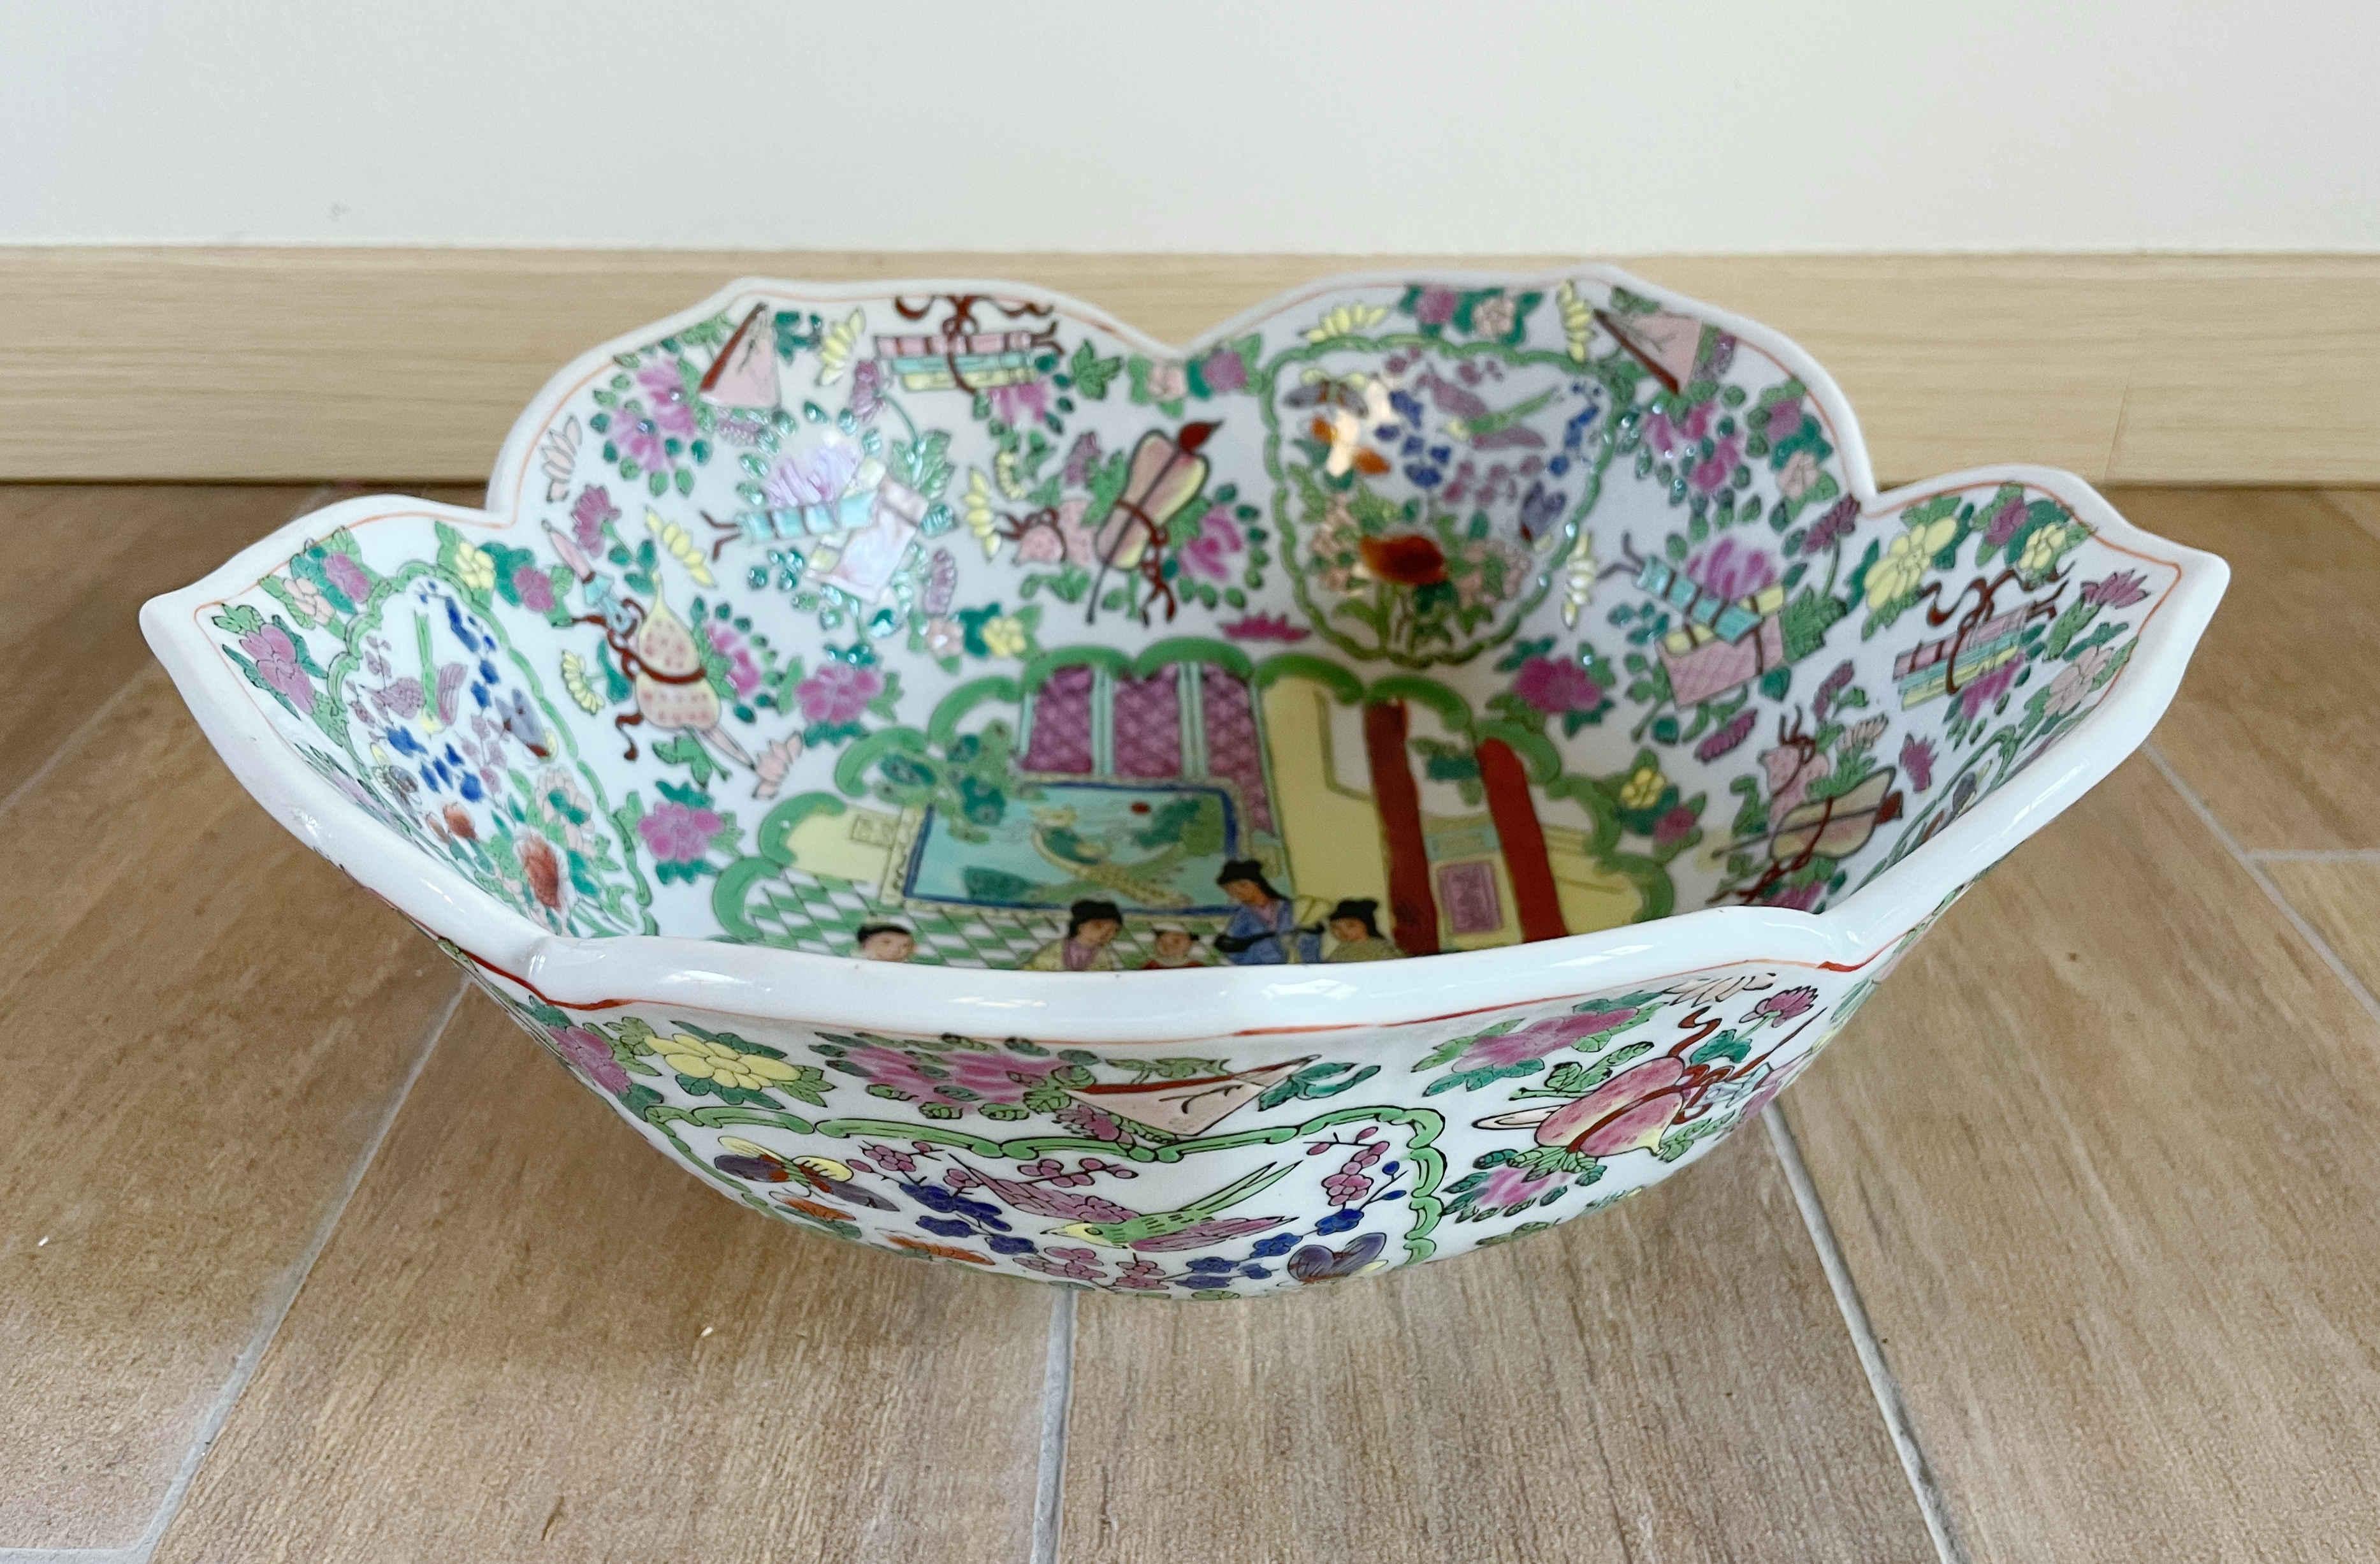 Colorful hand painted Chinese famille rose porcelain bowl with social scenes and nature motifs of butterflies, florals, and birds
Stamped with Qianlong four-character mark
Diameter 12 inches / height 5 inches
1 available in stock in Italy
Order